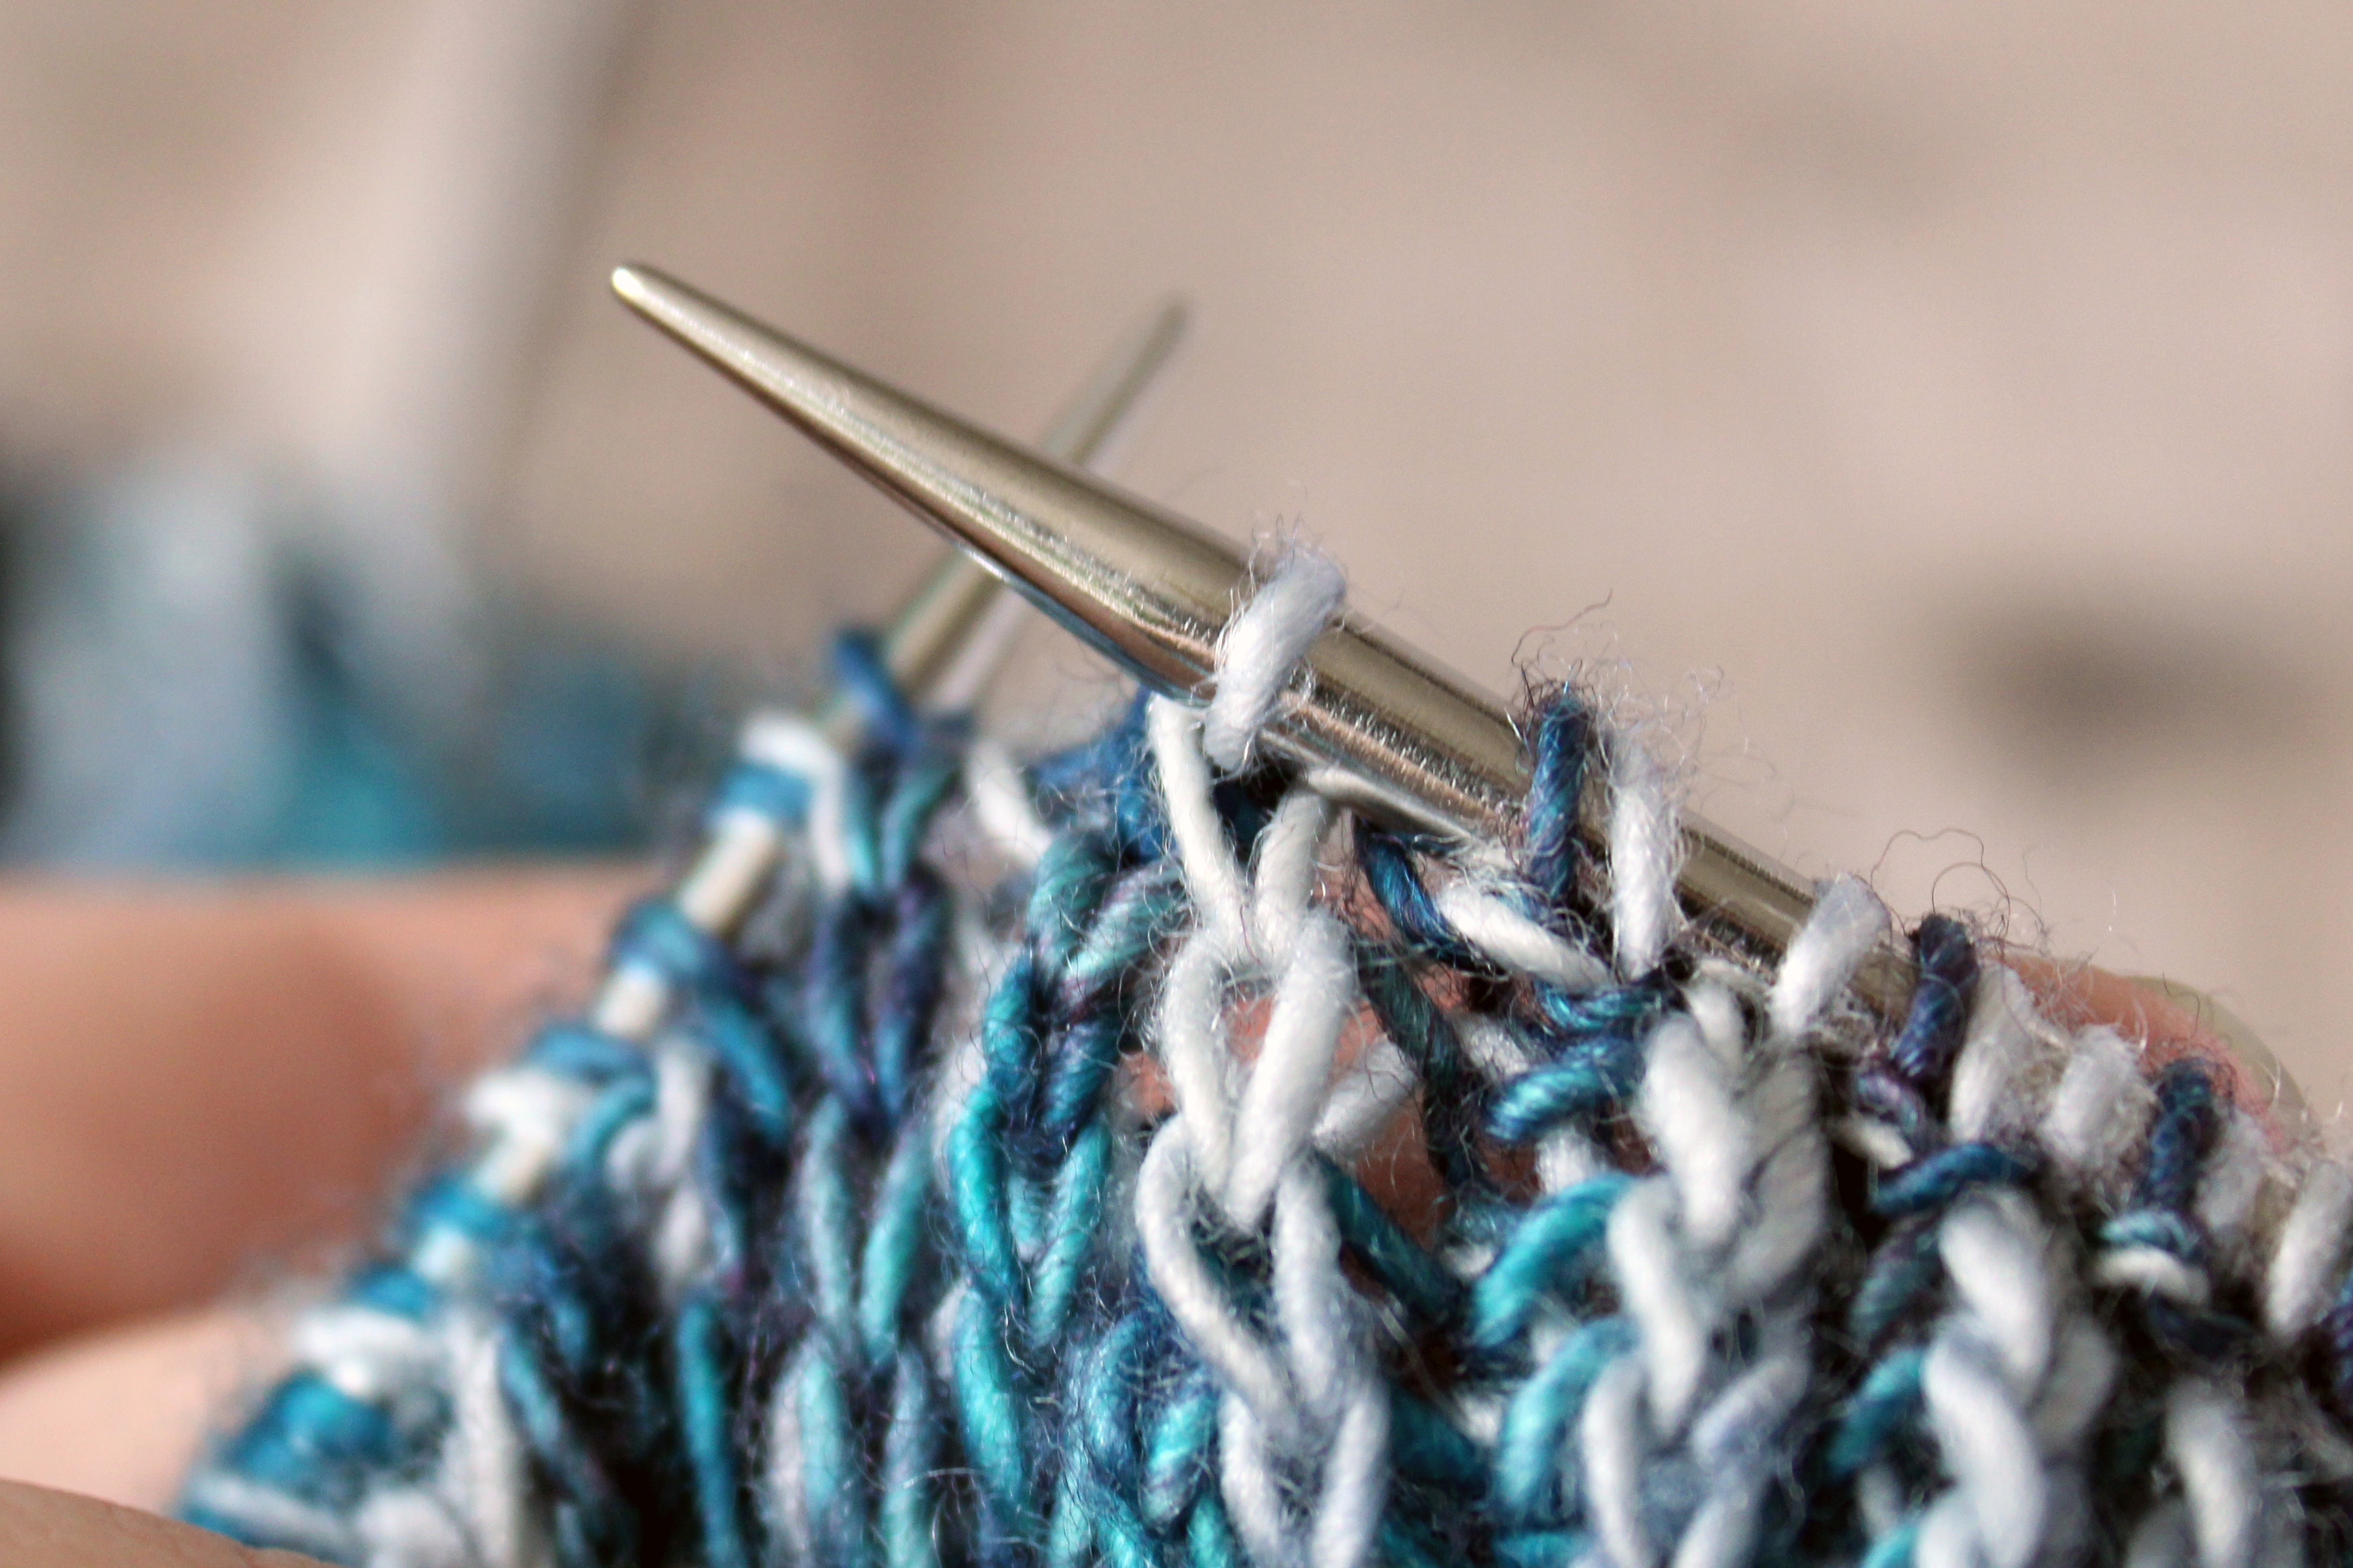 The completed ssbrk stitch on the right hand needle.